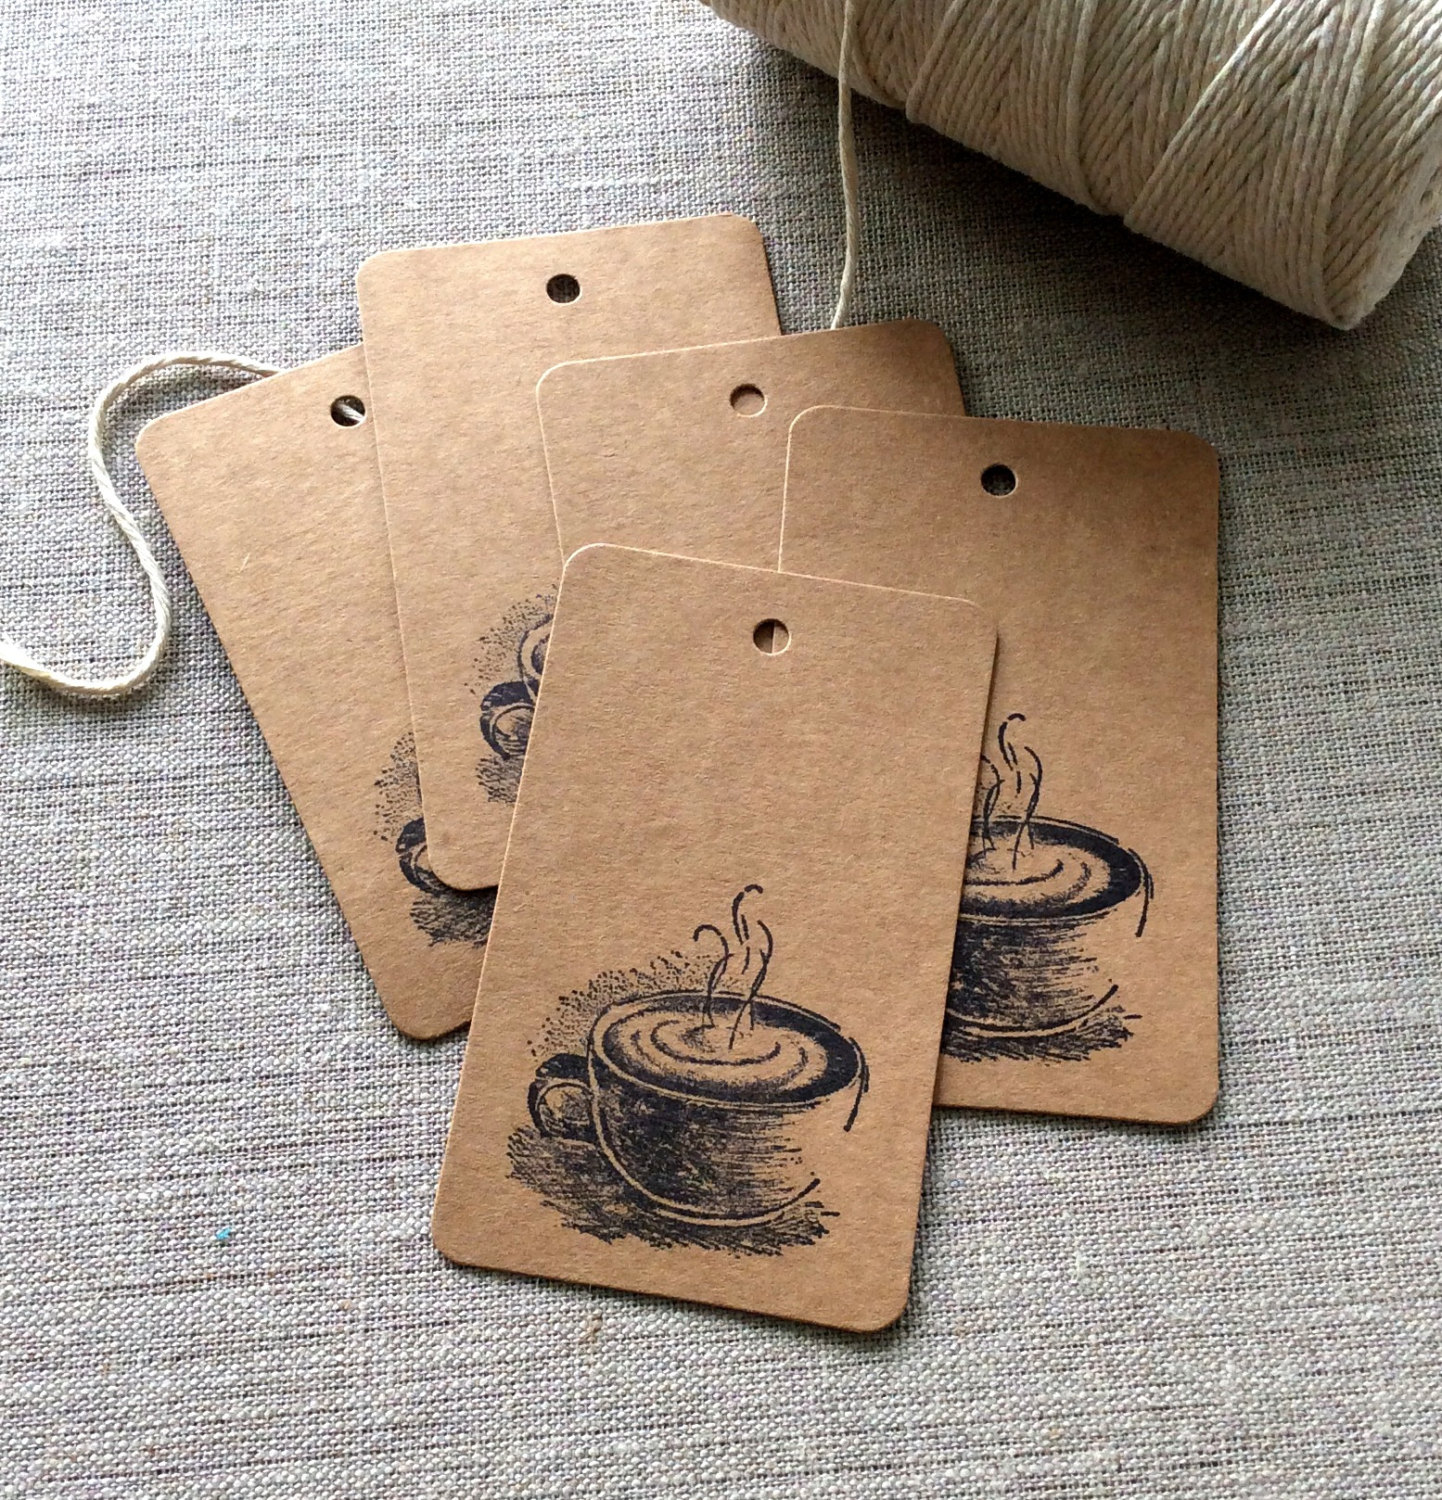 Vintage Inspired Favor Tags | by Beth and Olivia